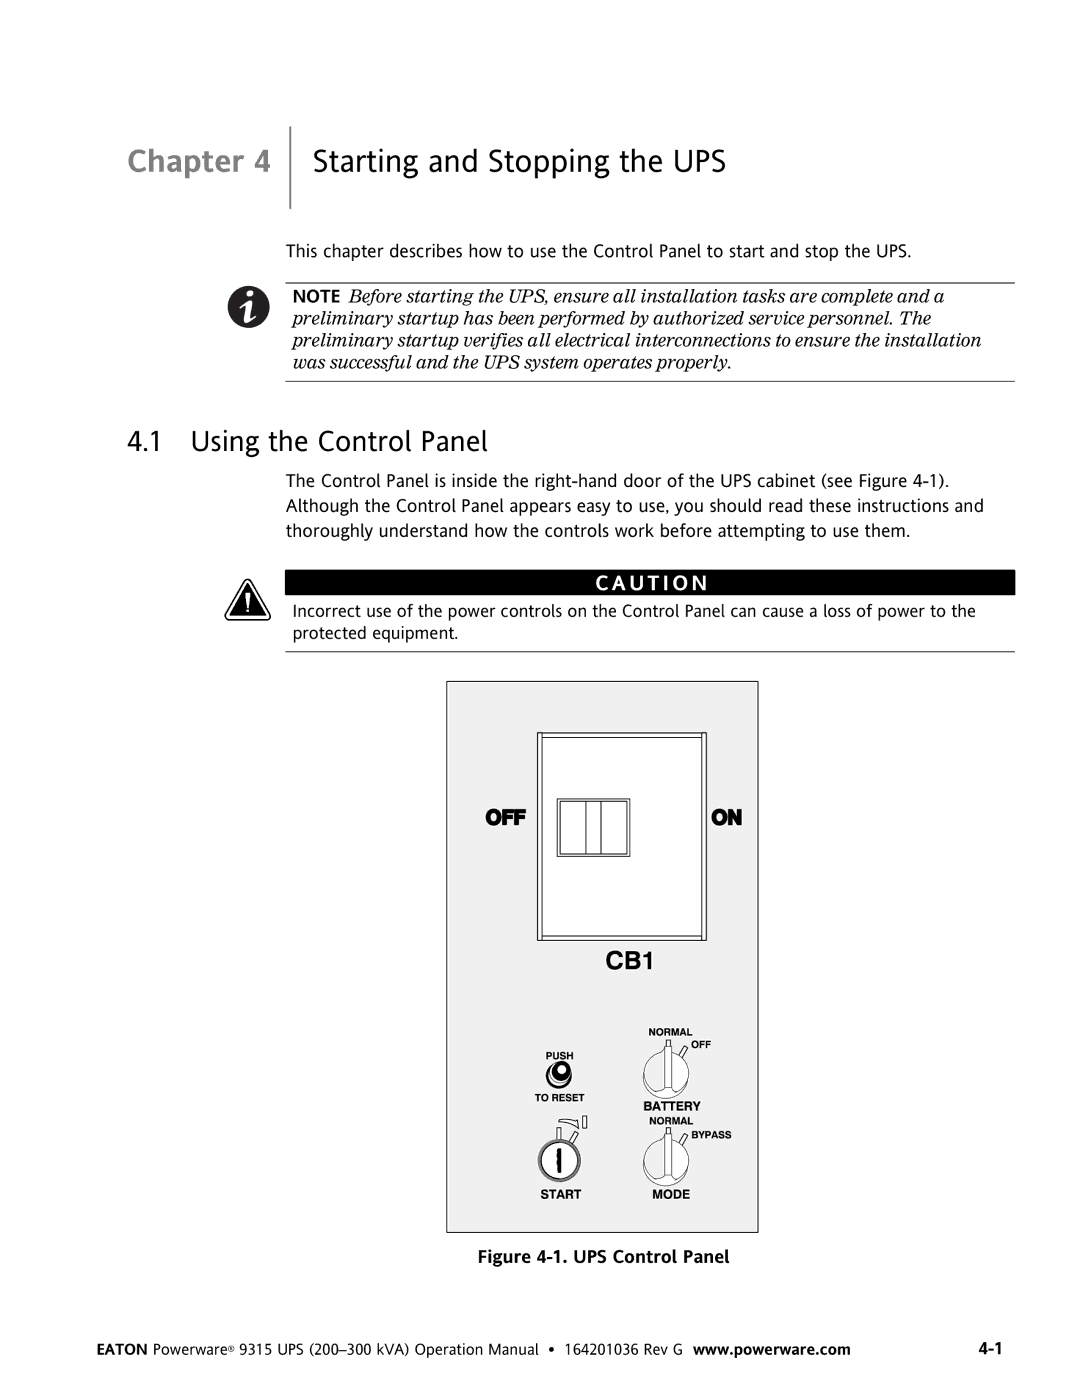 Powerware 9315 UPS operation manual Starting and Stopping the UPS, Using the Control Panel 